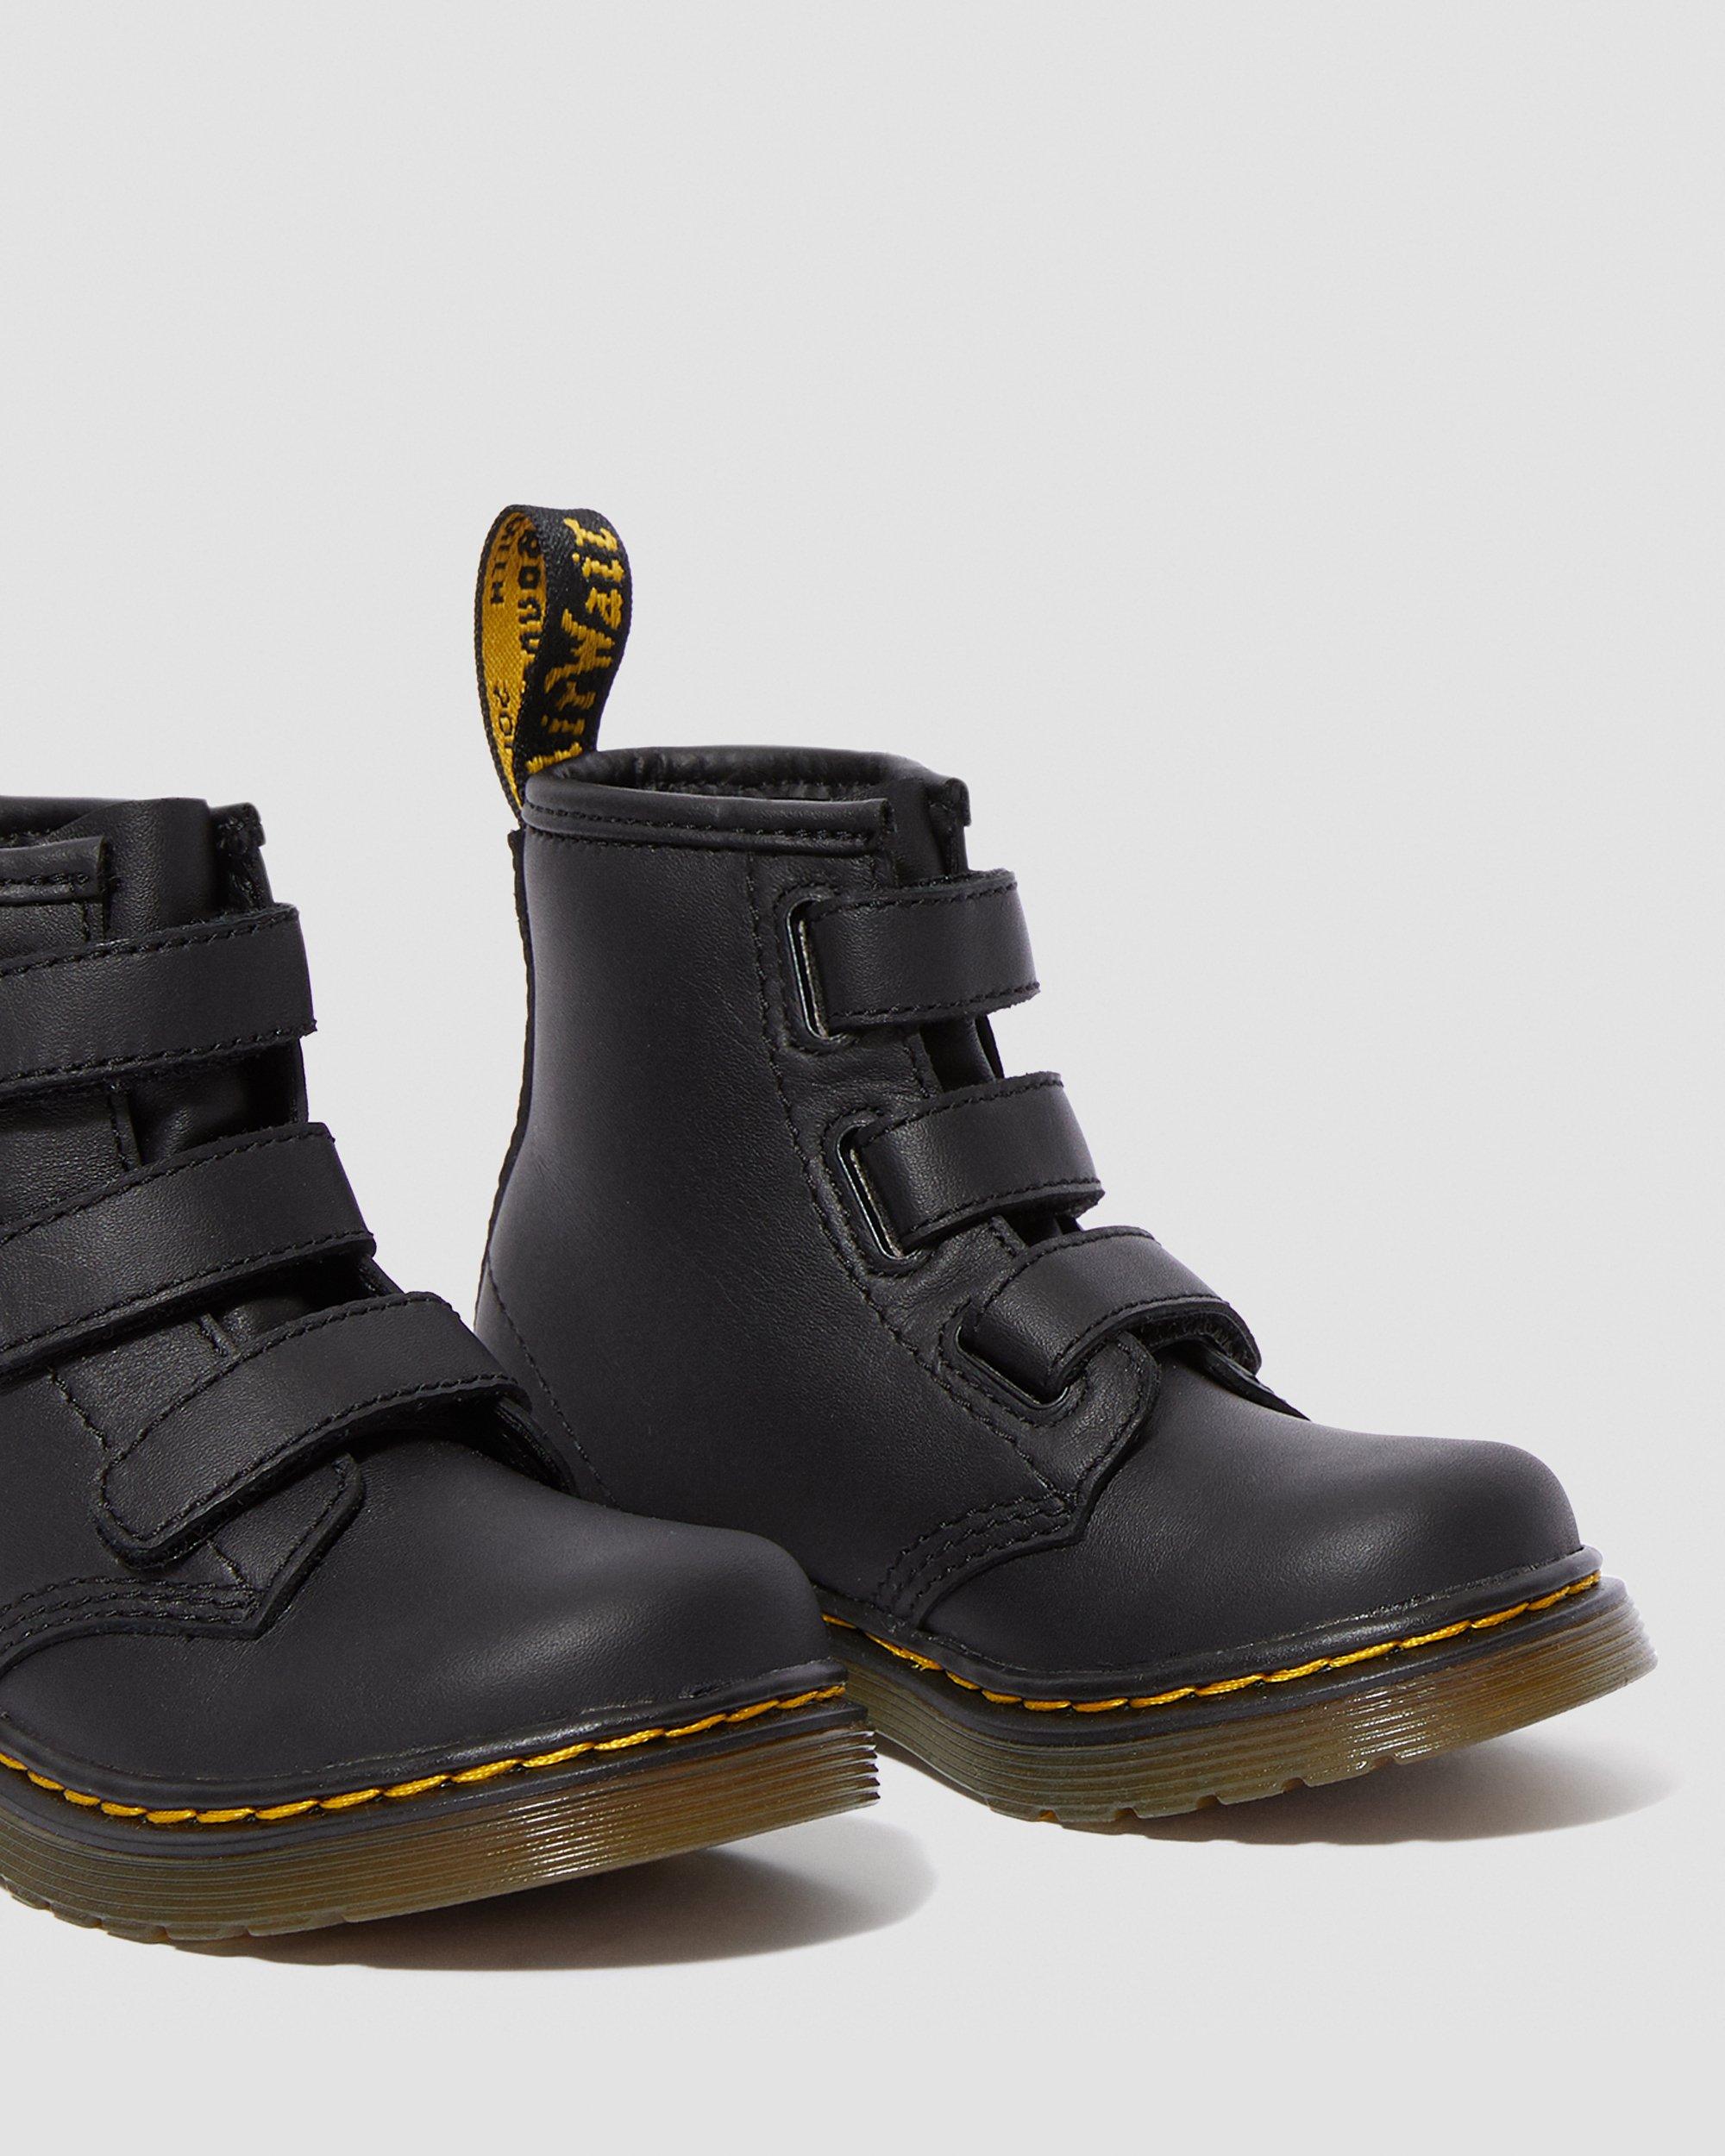 1460 STRAP TODDLER LEATHER ANKLE BOOTS Dr. Martens